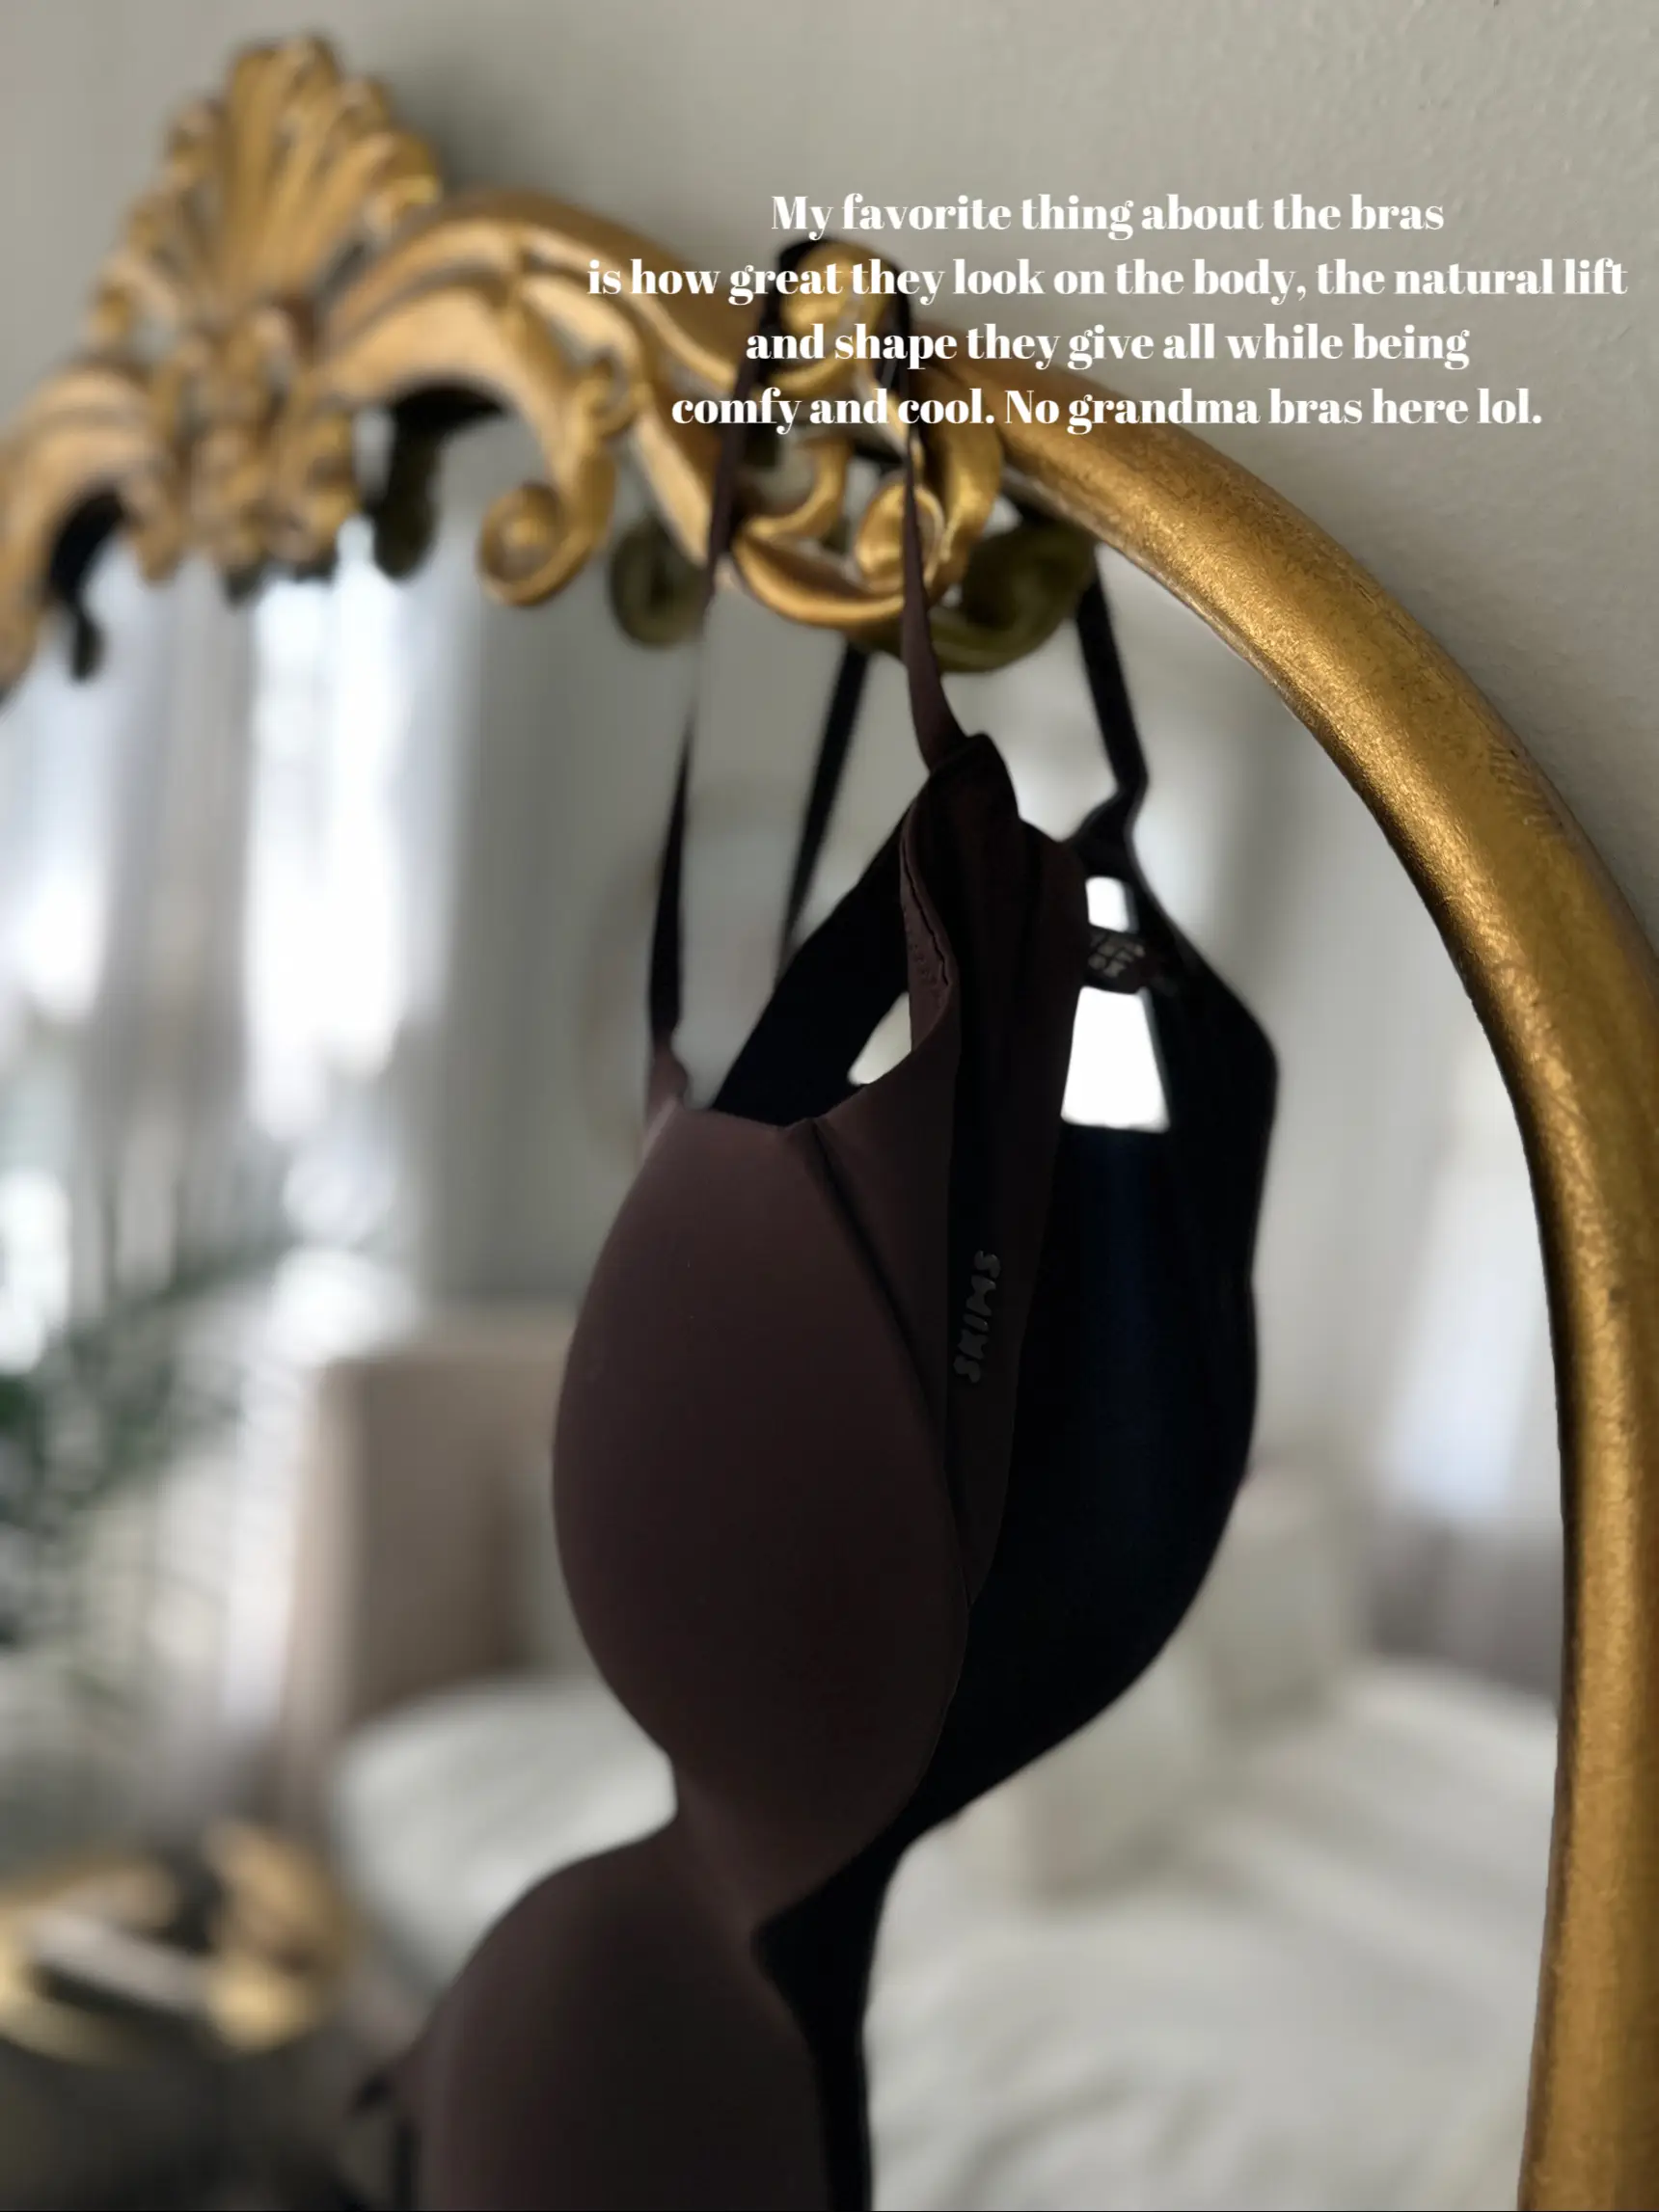 Best-Selling Skims Bras Review, Gallery posted by StephaniePernas